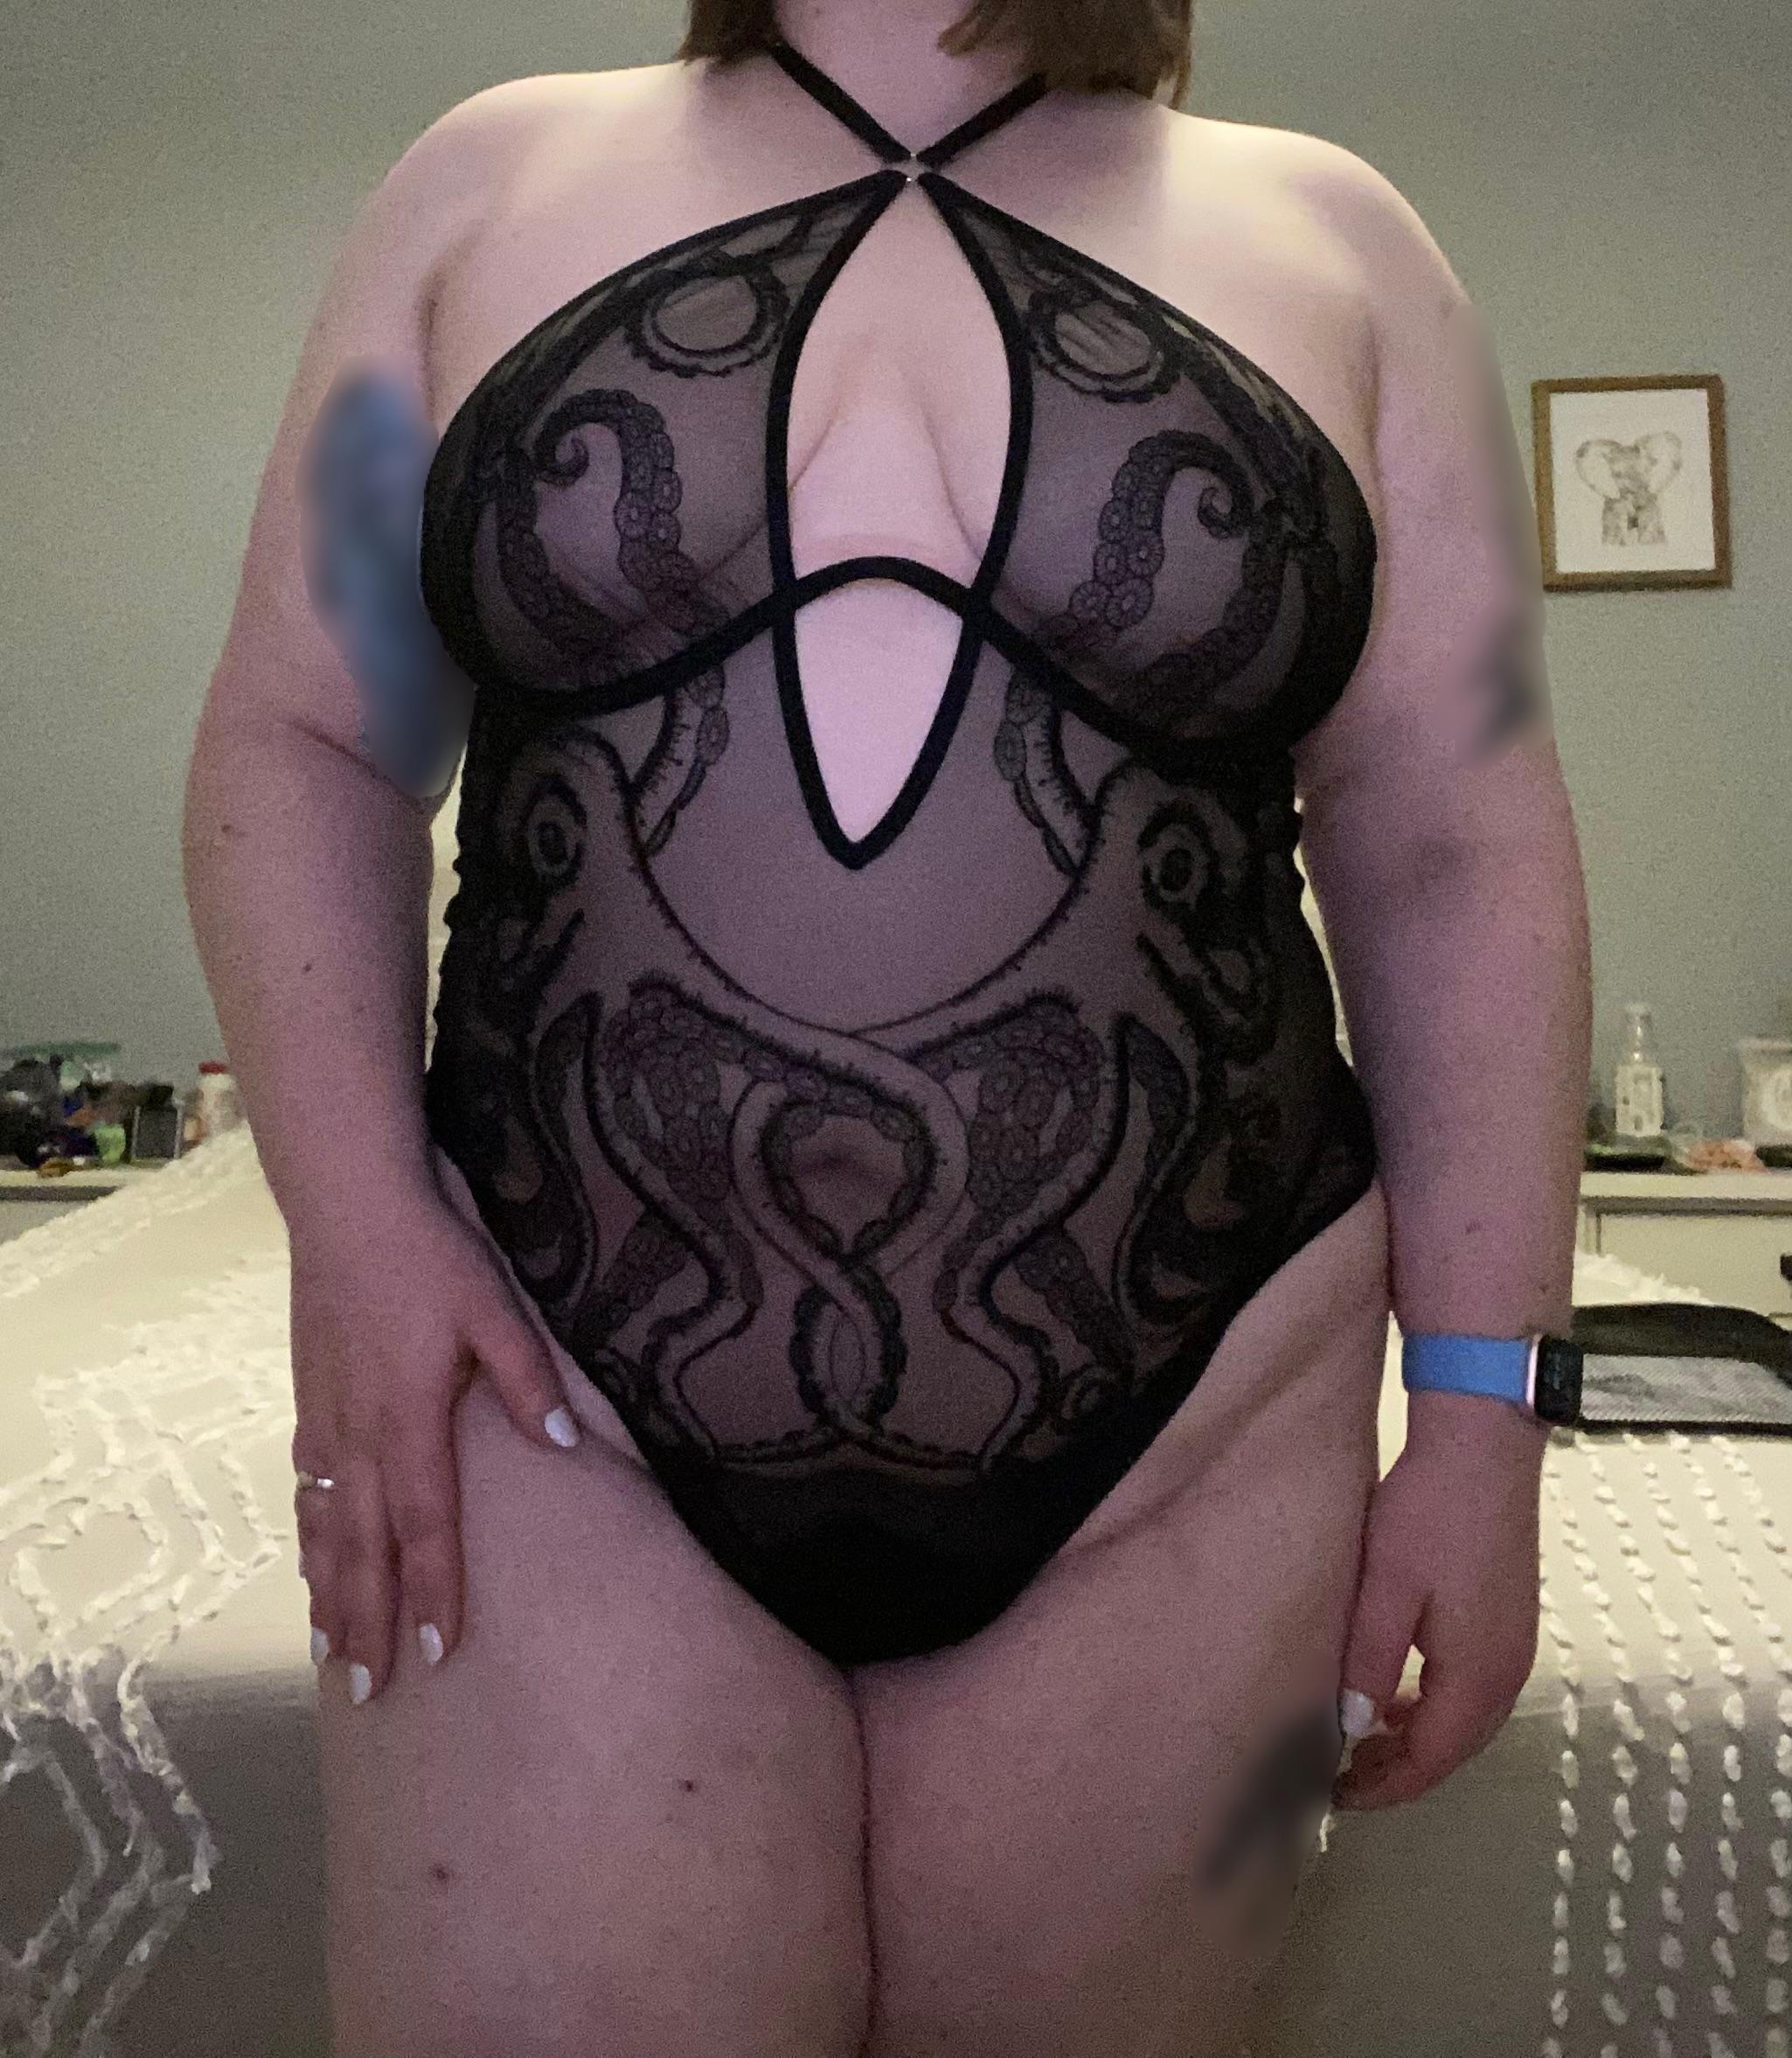 Thick BBW -  Bodysuits have grown on me more and more 😉